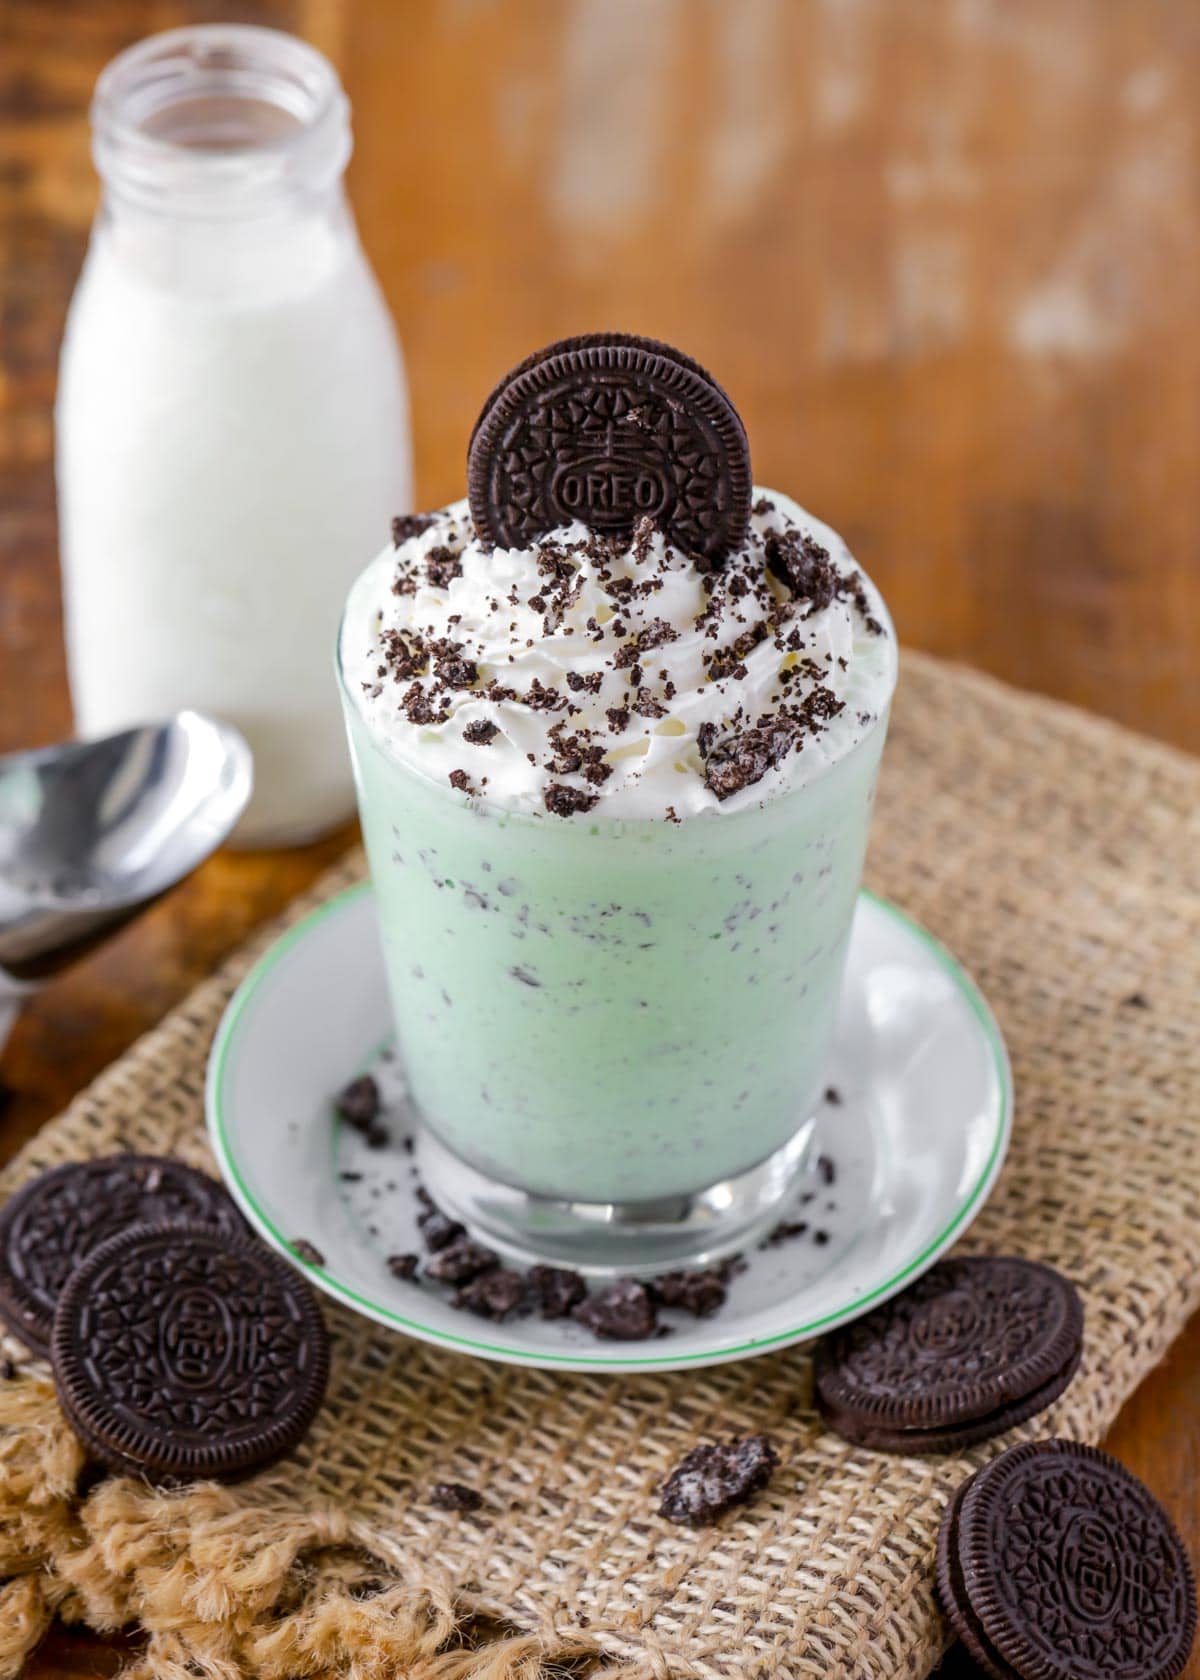 Mint Oreo Ice Cream Shakes topped with whipped cream and an Oreo